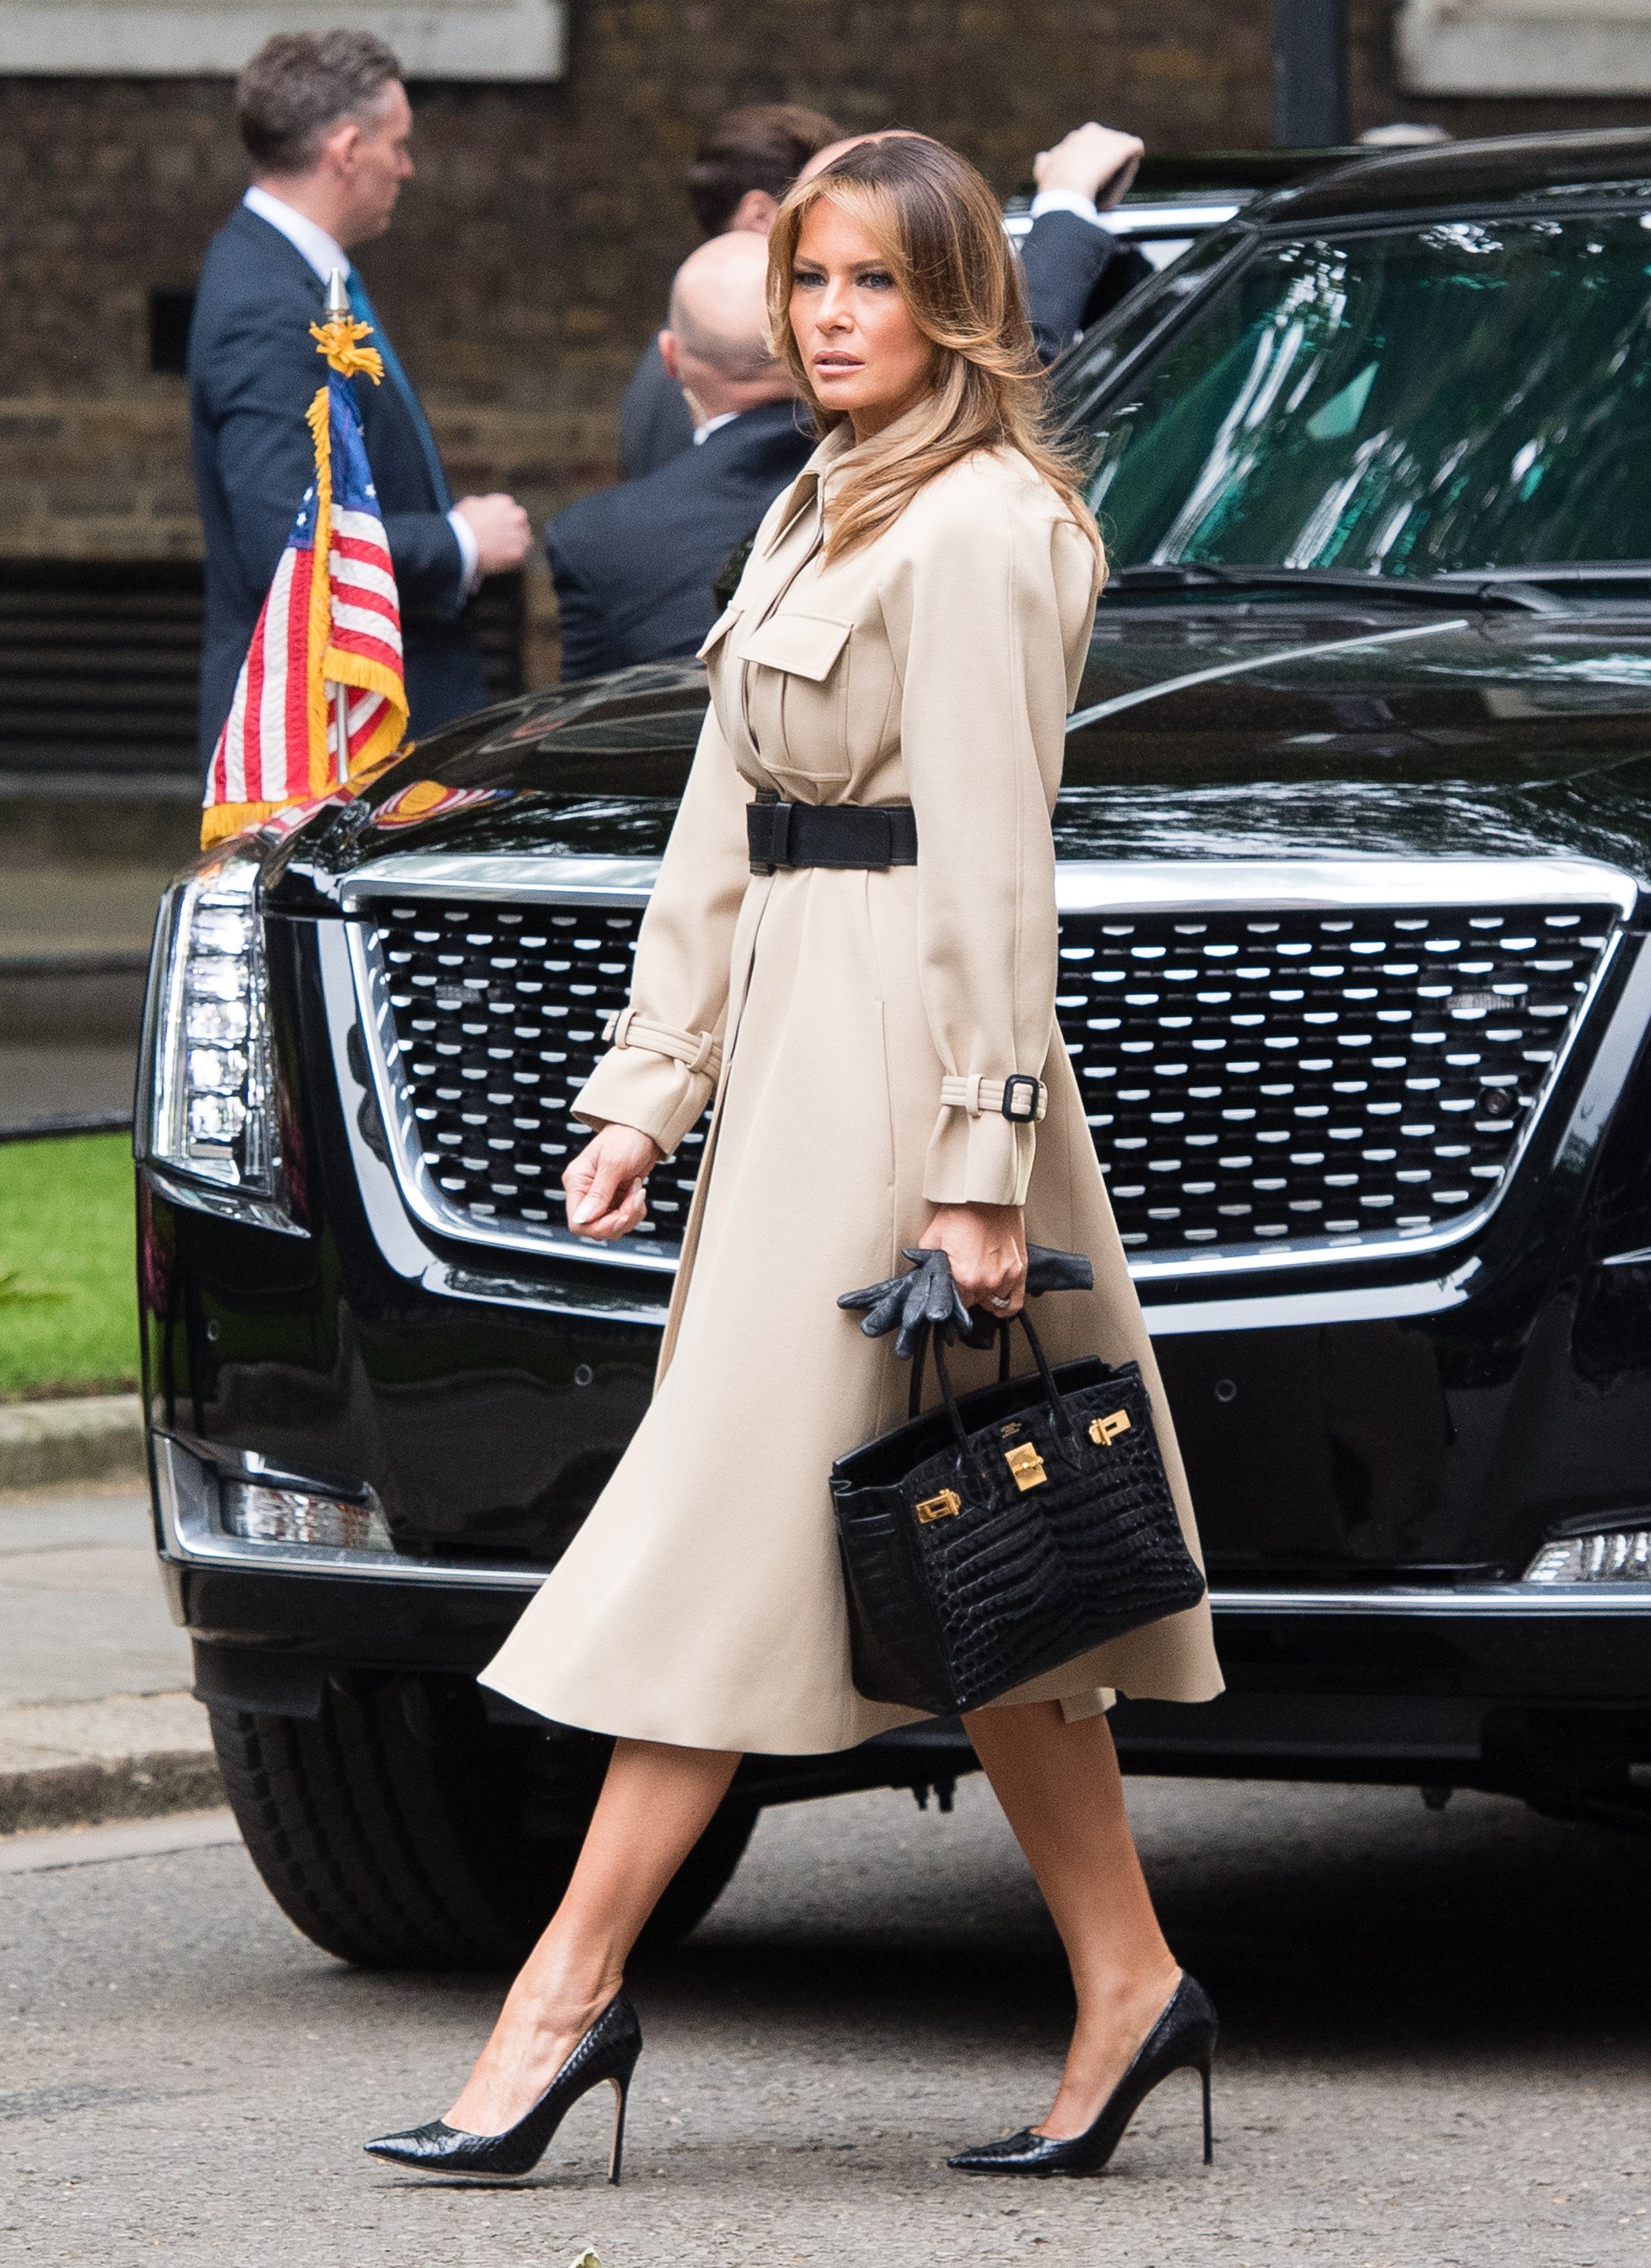 Melania Trump went with a military vibe via pieces from big-label luxury houses on a visit to Number 10 Downing Street during a 2019 state visit to Britain. Photo: WireImage